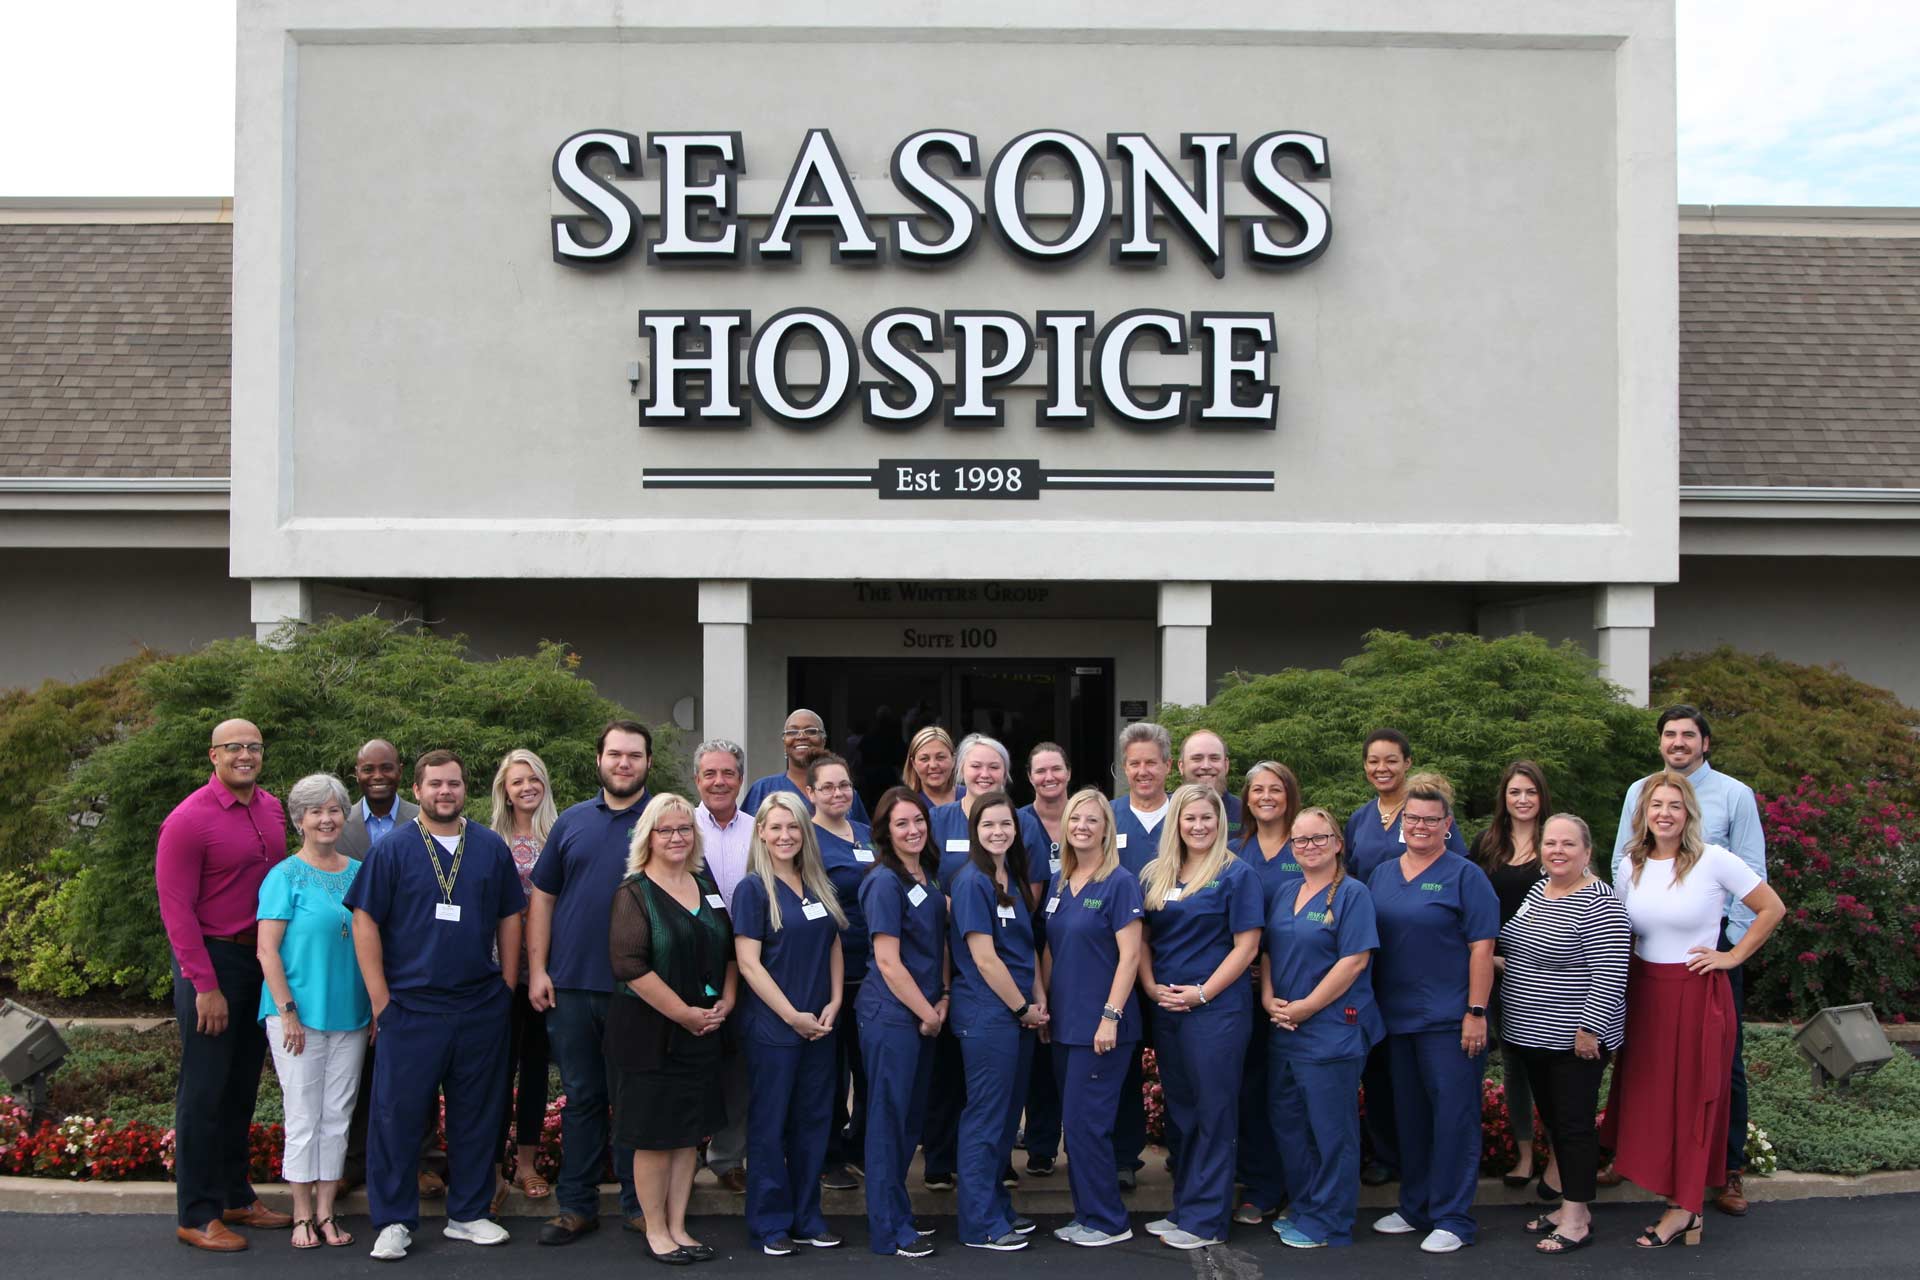 Seasons Hospice staff gather outside the front doors of the facility to pose for a group photo.